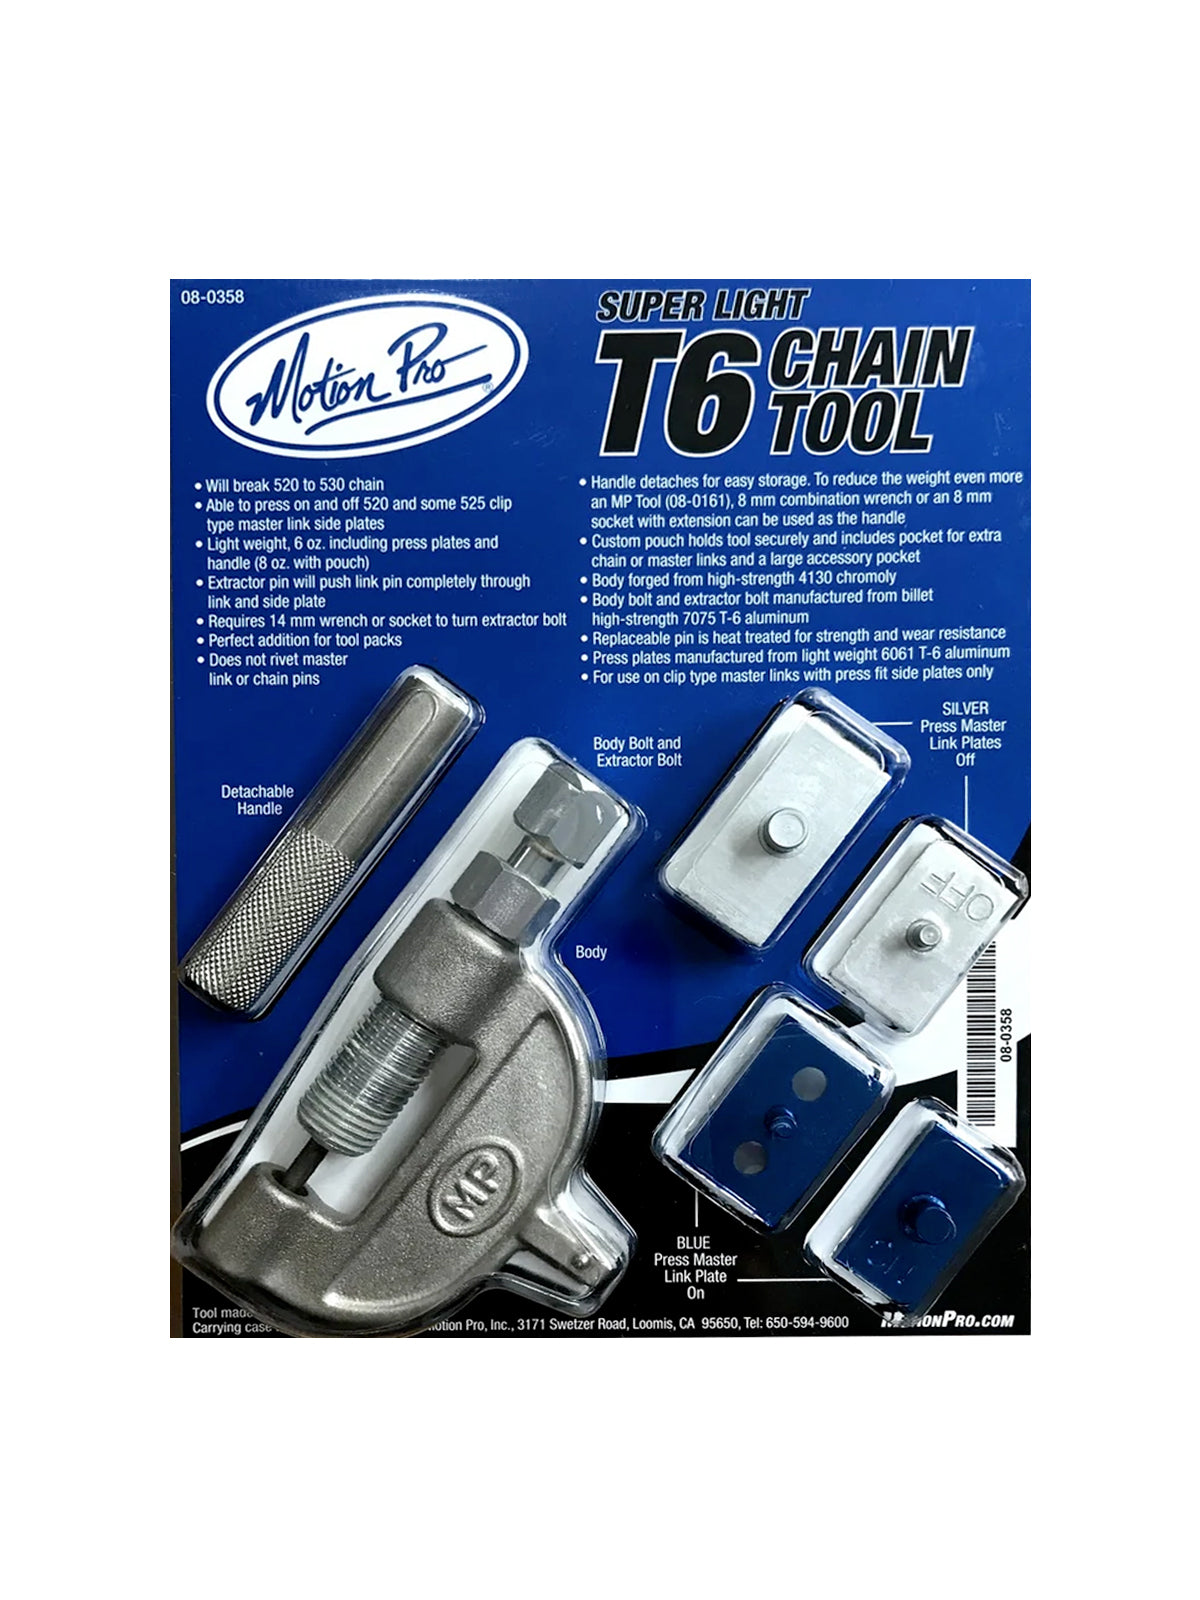 Motion Pro Light Weight Chain Breaker & Chain Press Tool #520 to #530